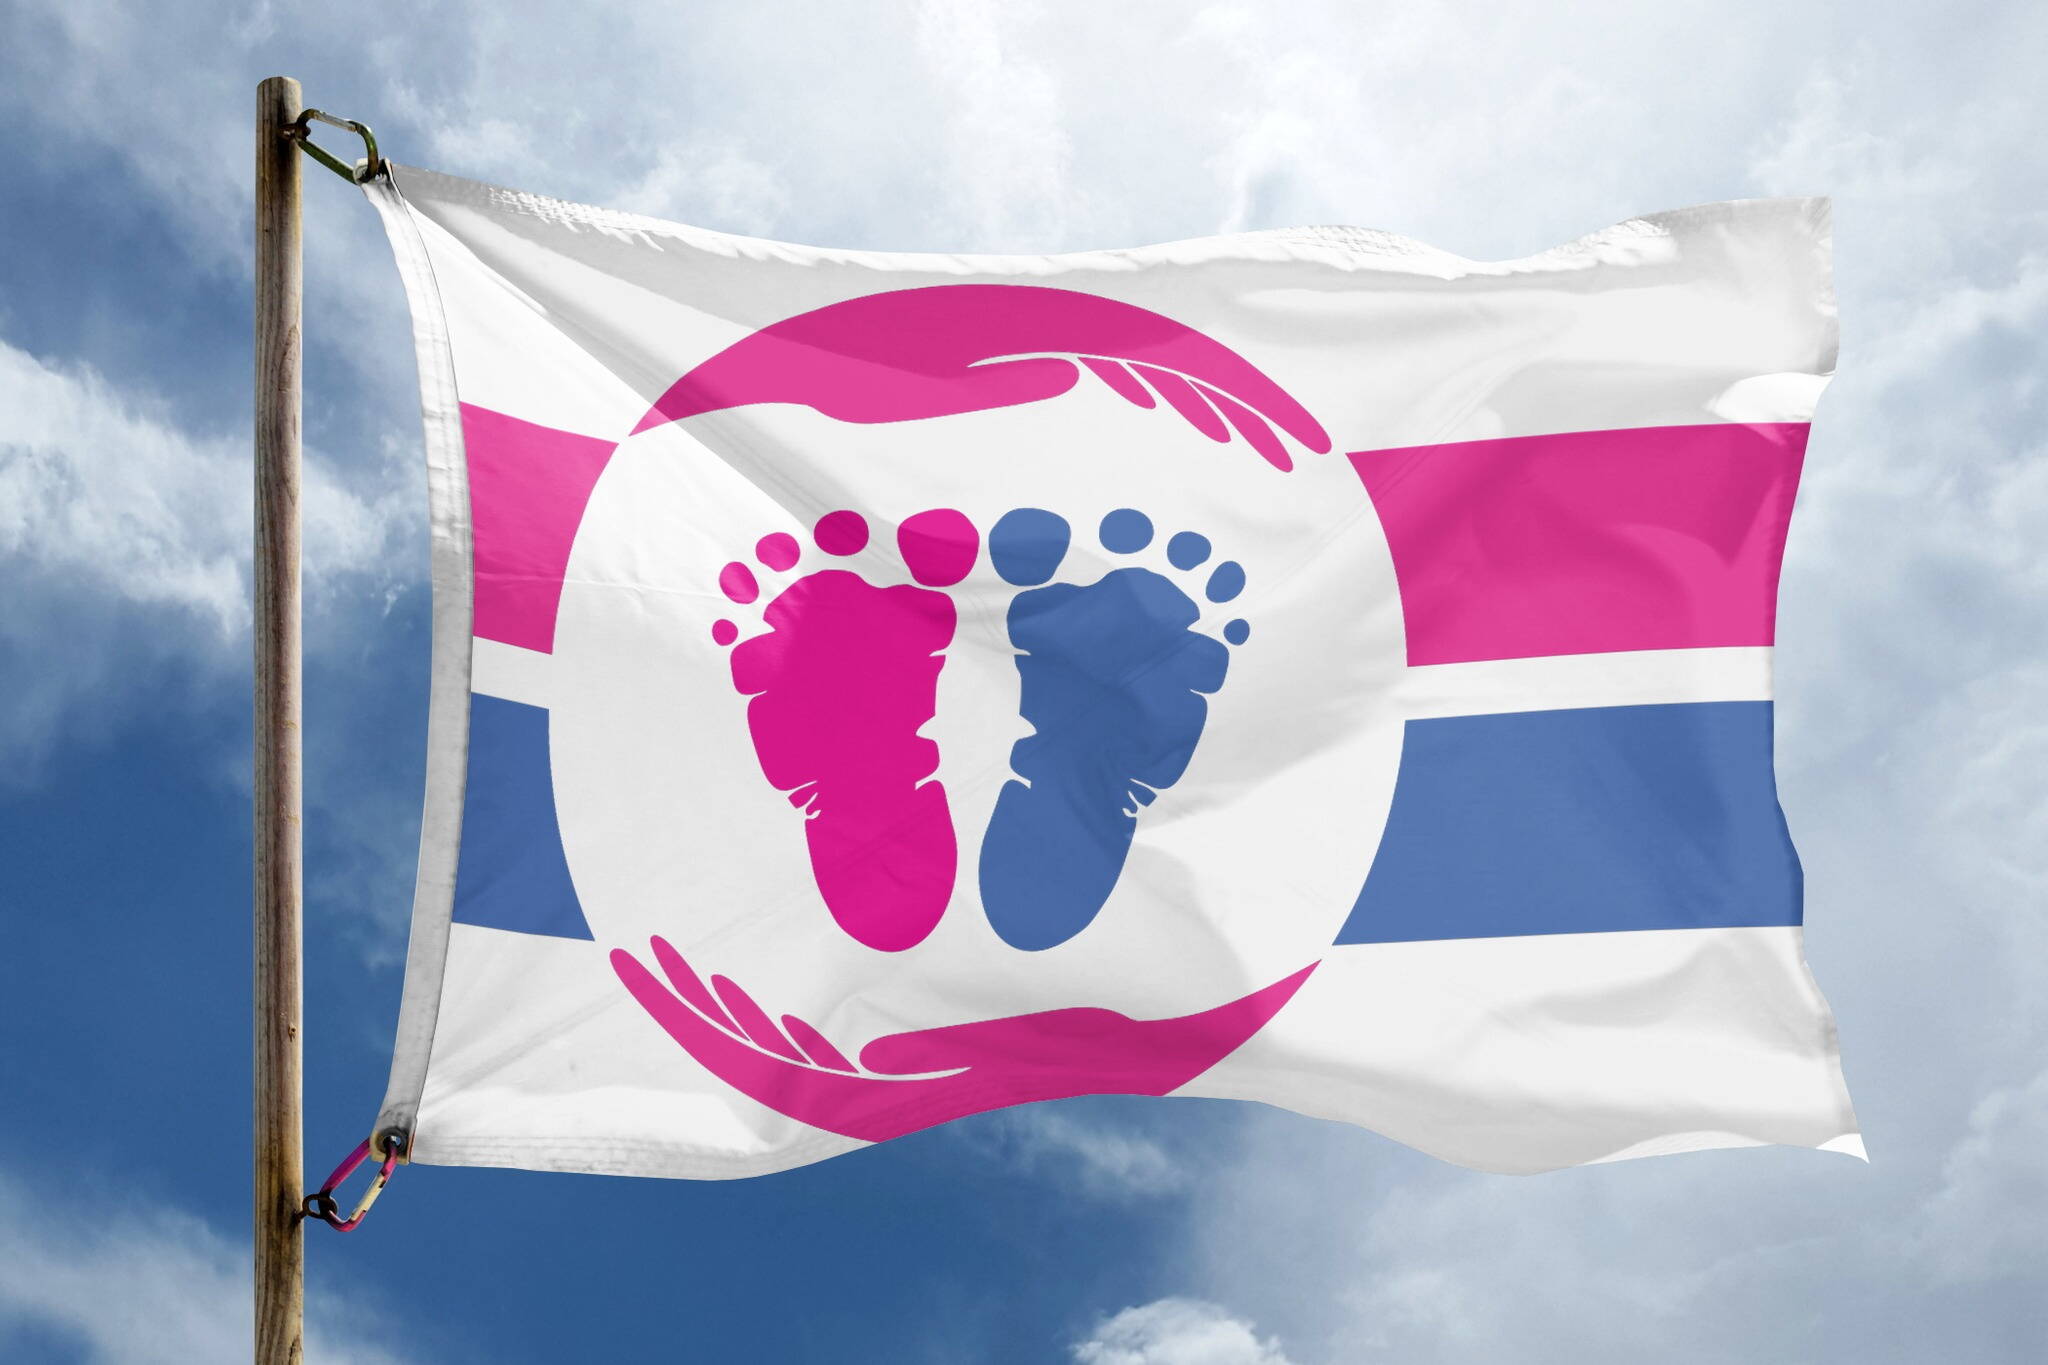 A pro-life flag, selected in a design contest, is being flown at some government buildings and other locations, sometimes as a counterstatement to Pride and other flags seen as politically oriented. A flag with the design is currently flying below the official Alaska State Flag at the Governor’s Residence after being hoisted there in recent days. (Photo by The Pro-Life Flag Project)